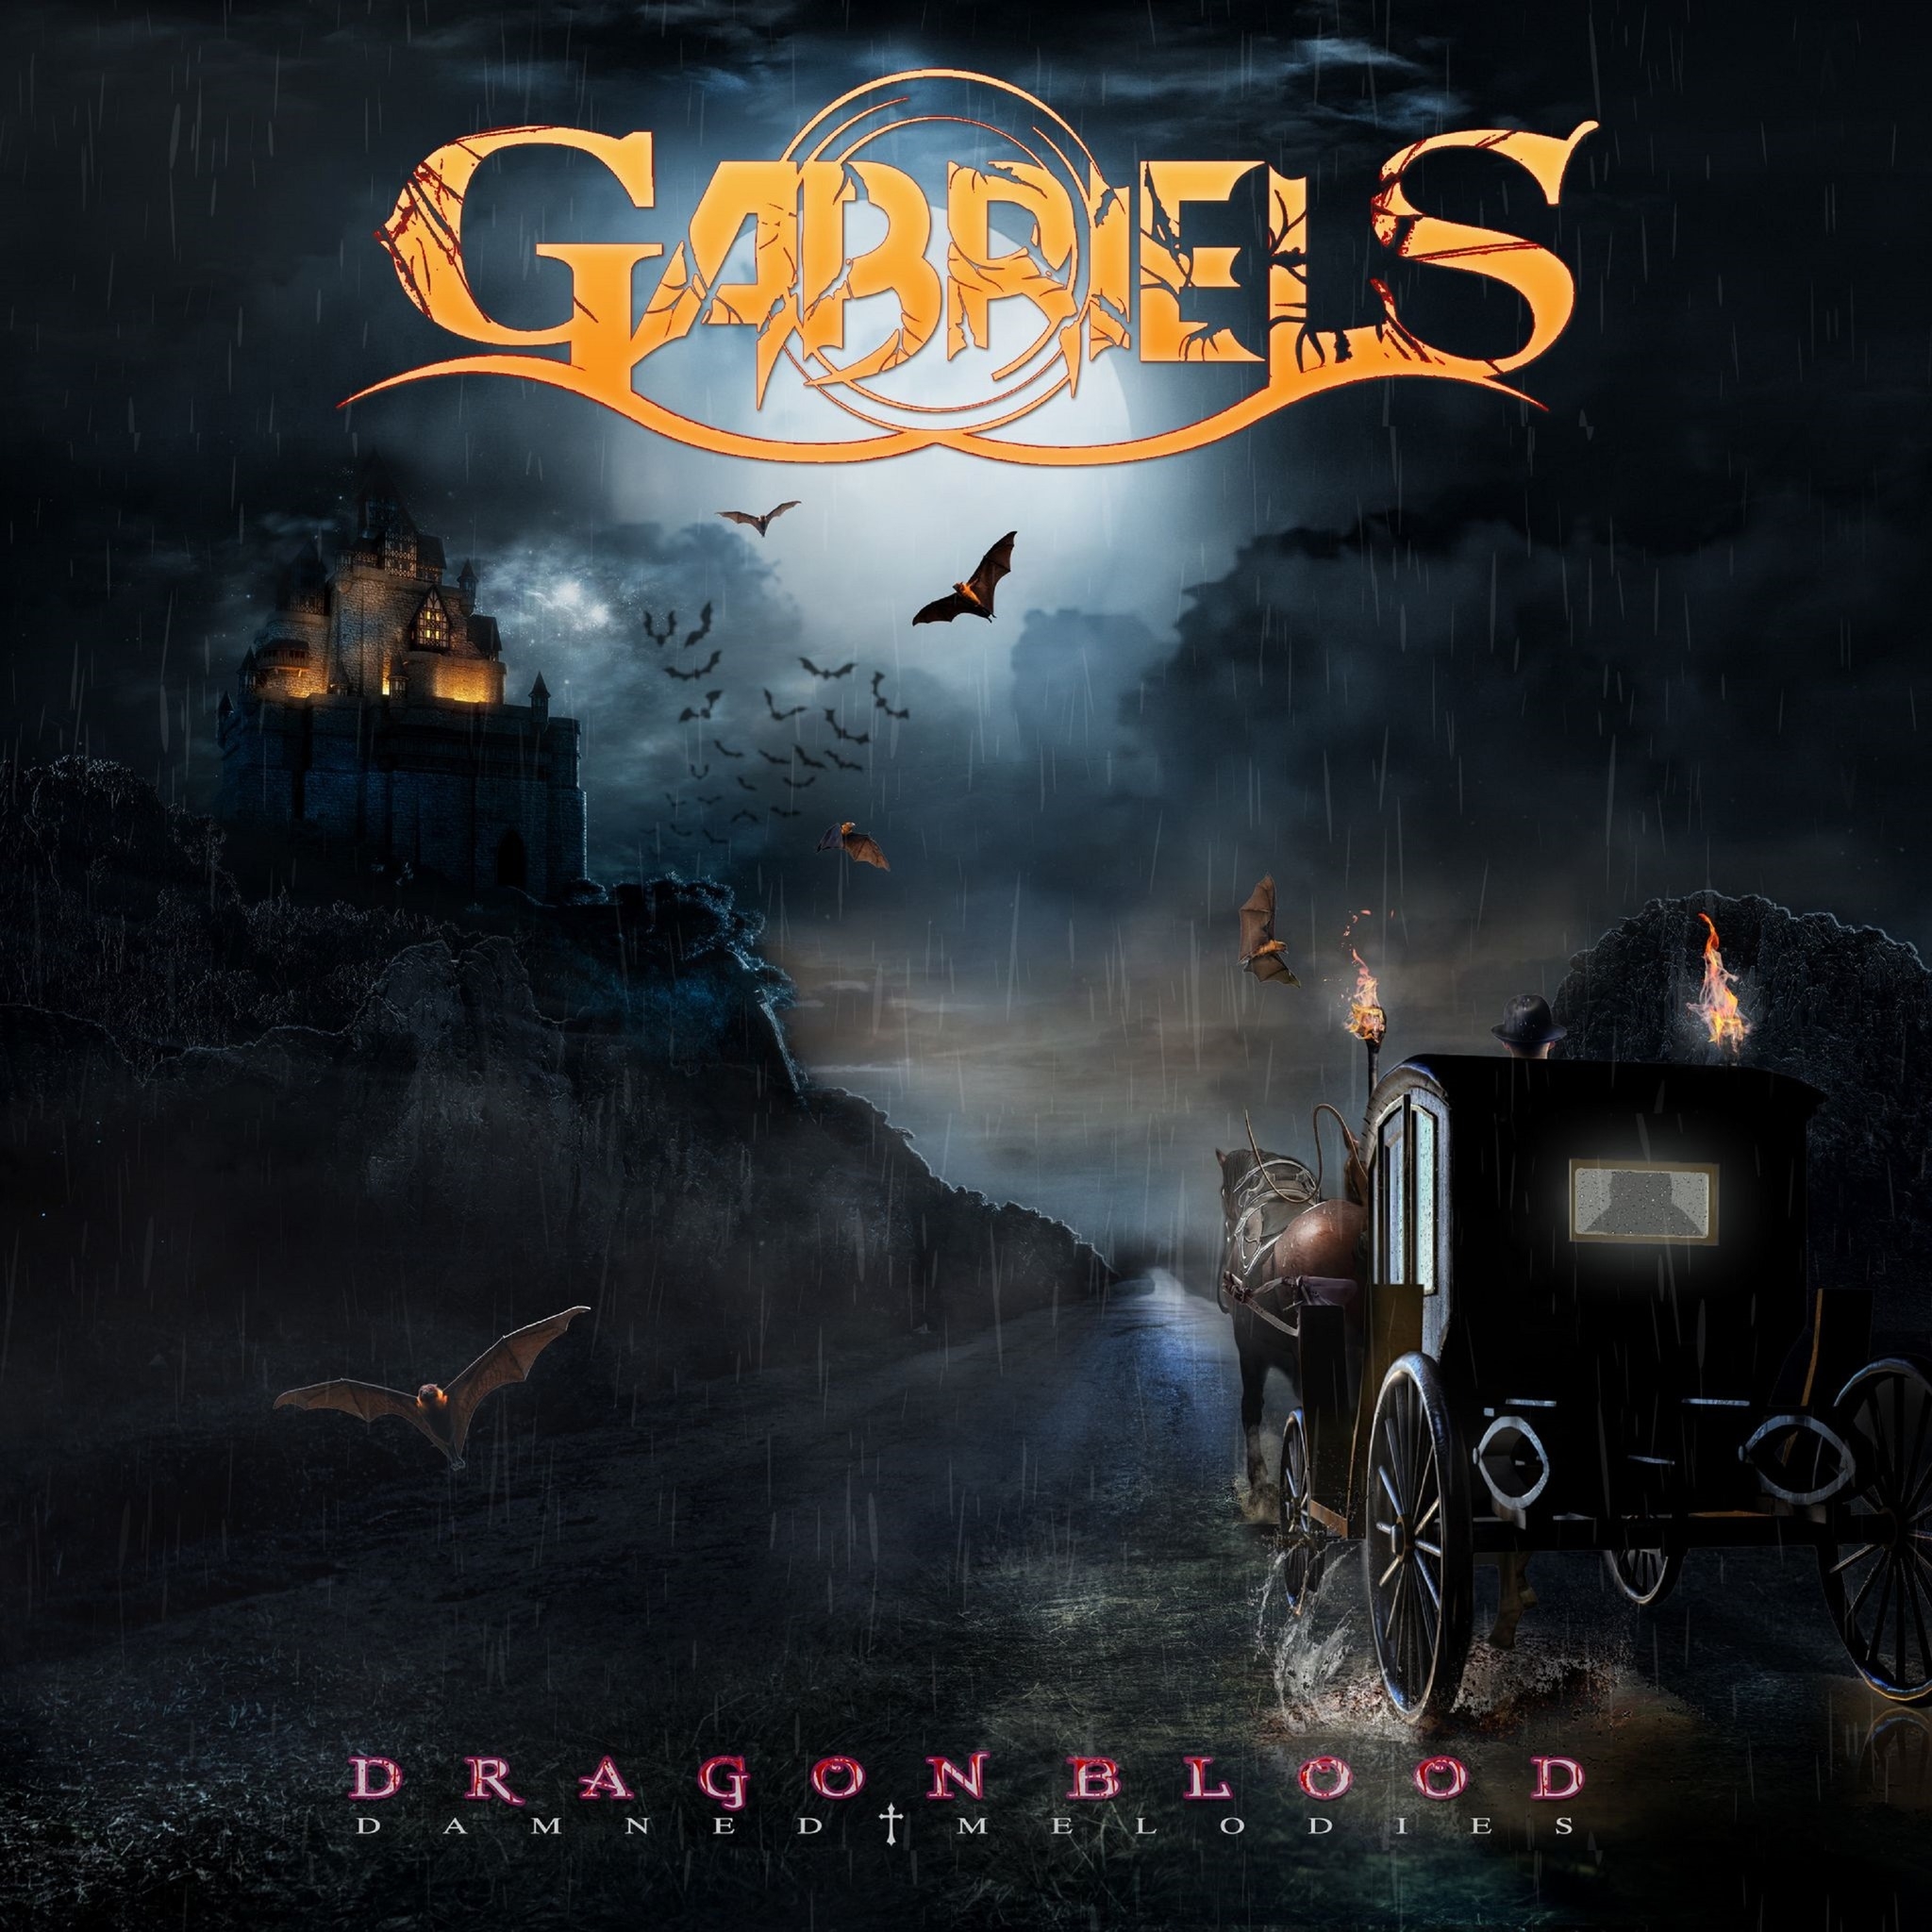 Gabriels – “Dragonblood (Damned Melodies)”